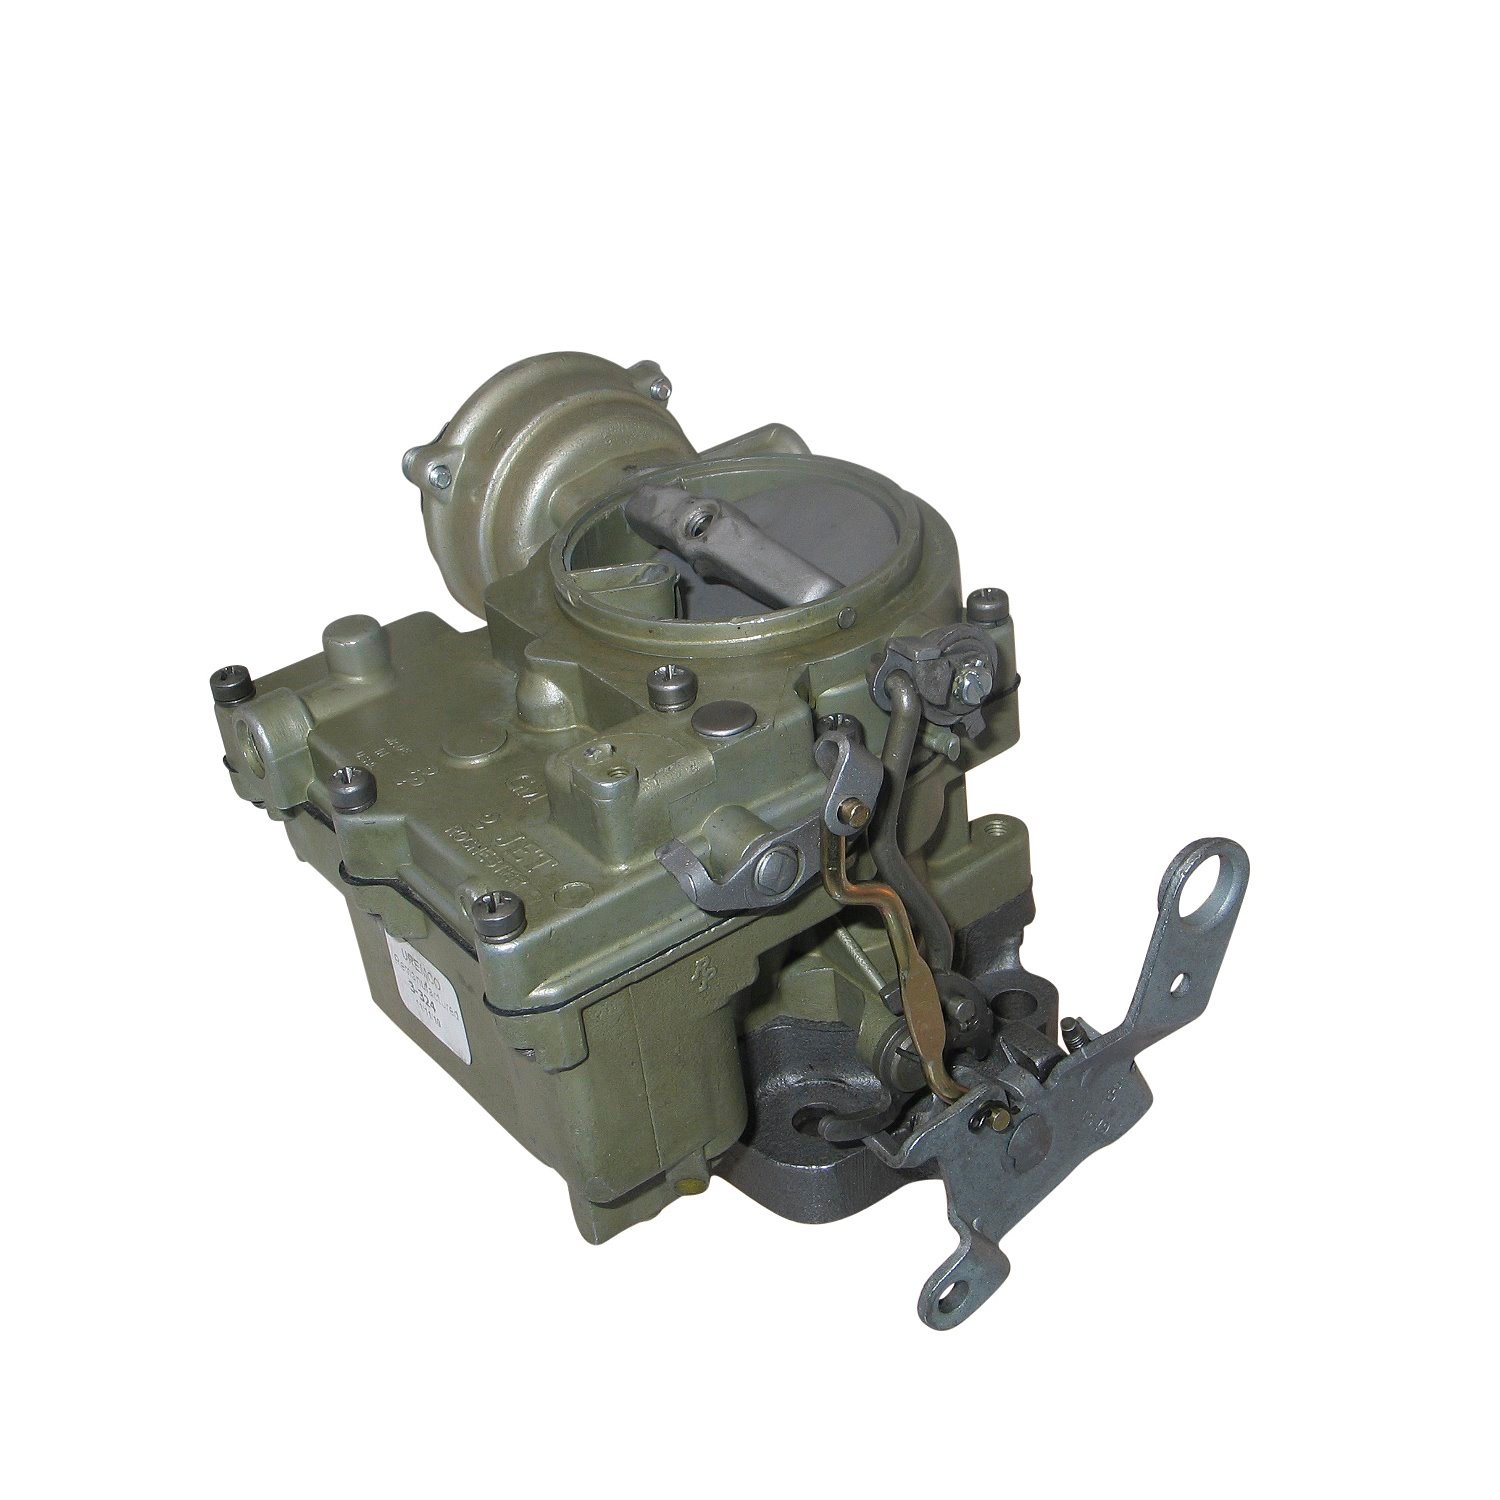 3-364 Rochester Remanufactured Carburetor, 2G-Style